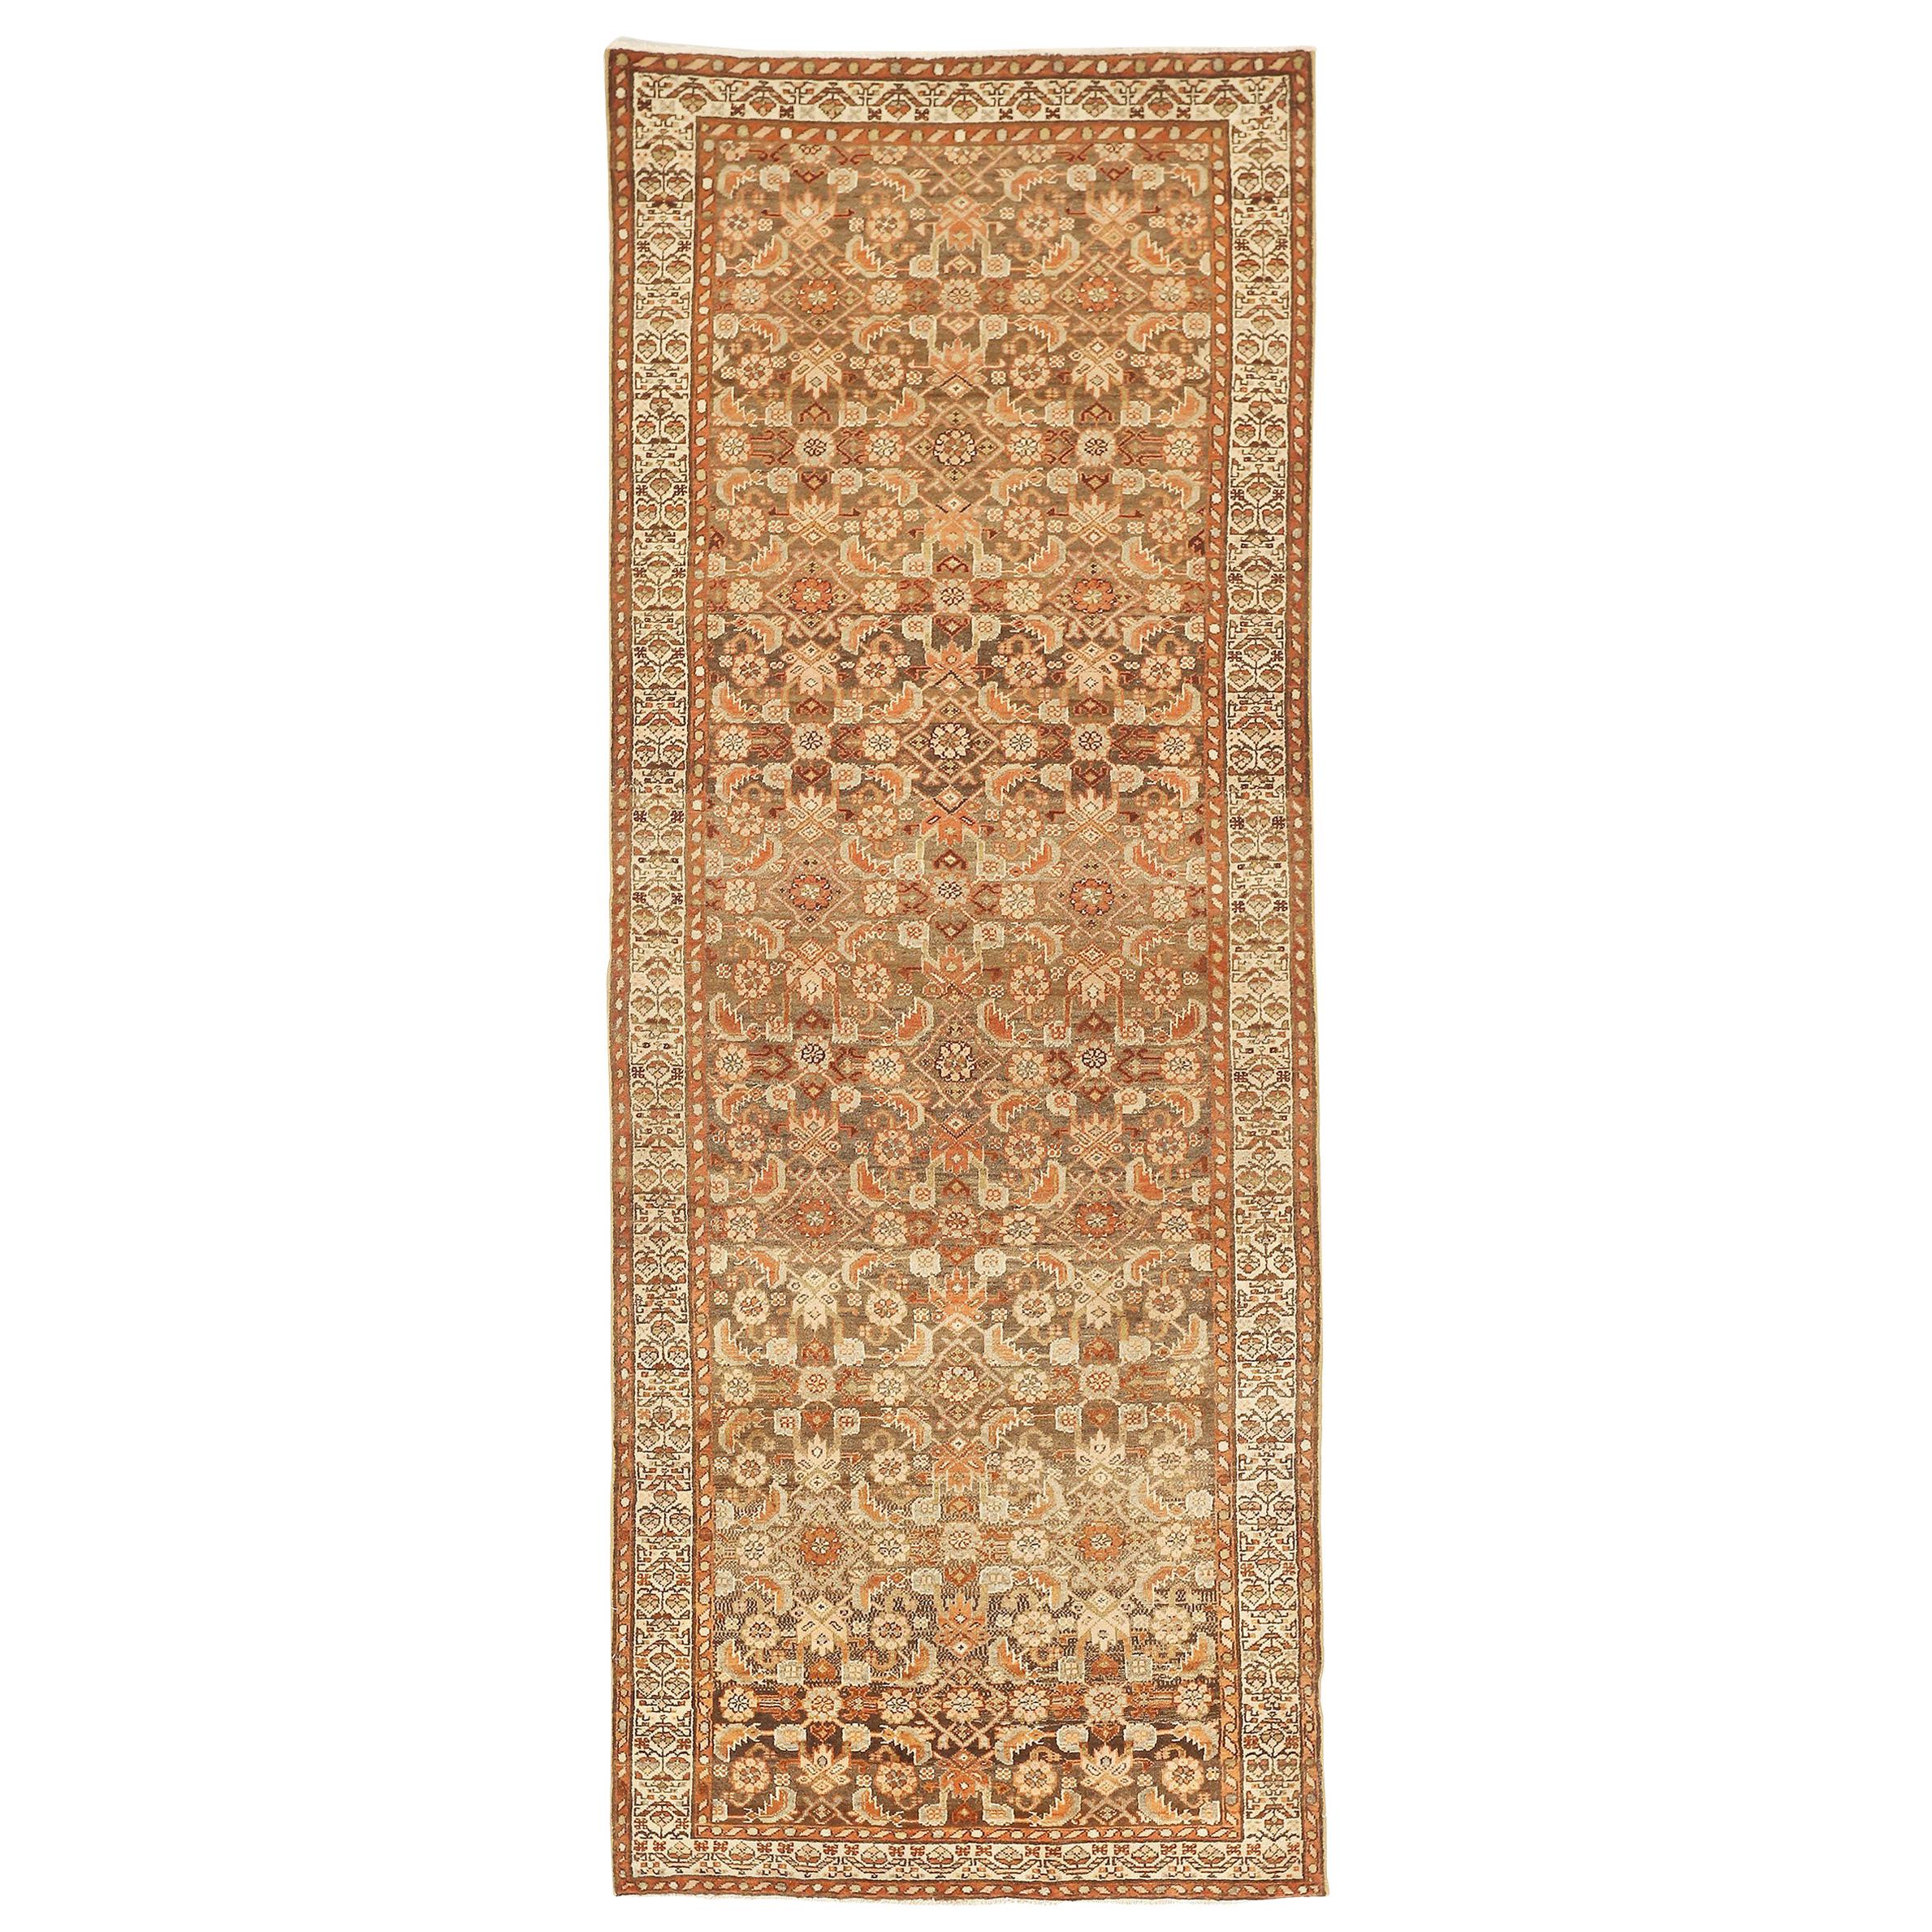 Antique Persian Malayer Runner Rug with Brown and Beige Flower Heads All-Over